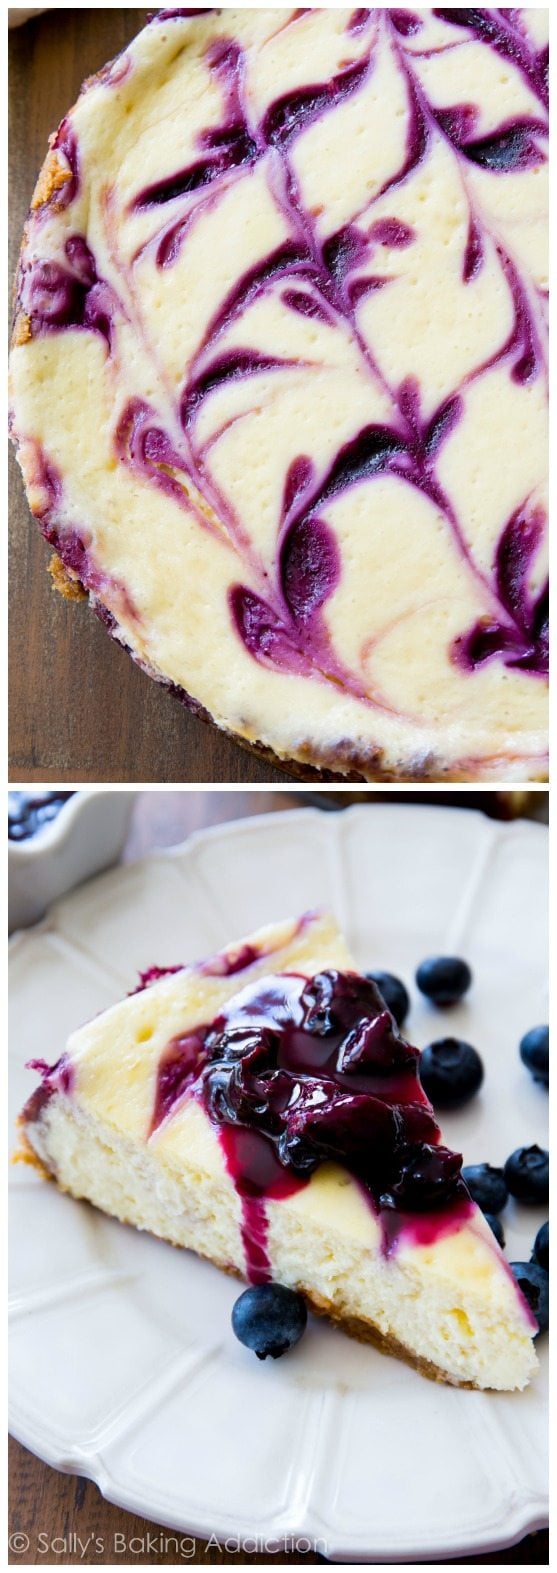 2 images of blueberry swirl cheesecake